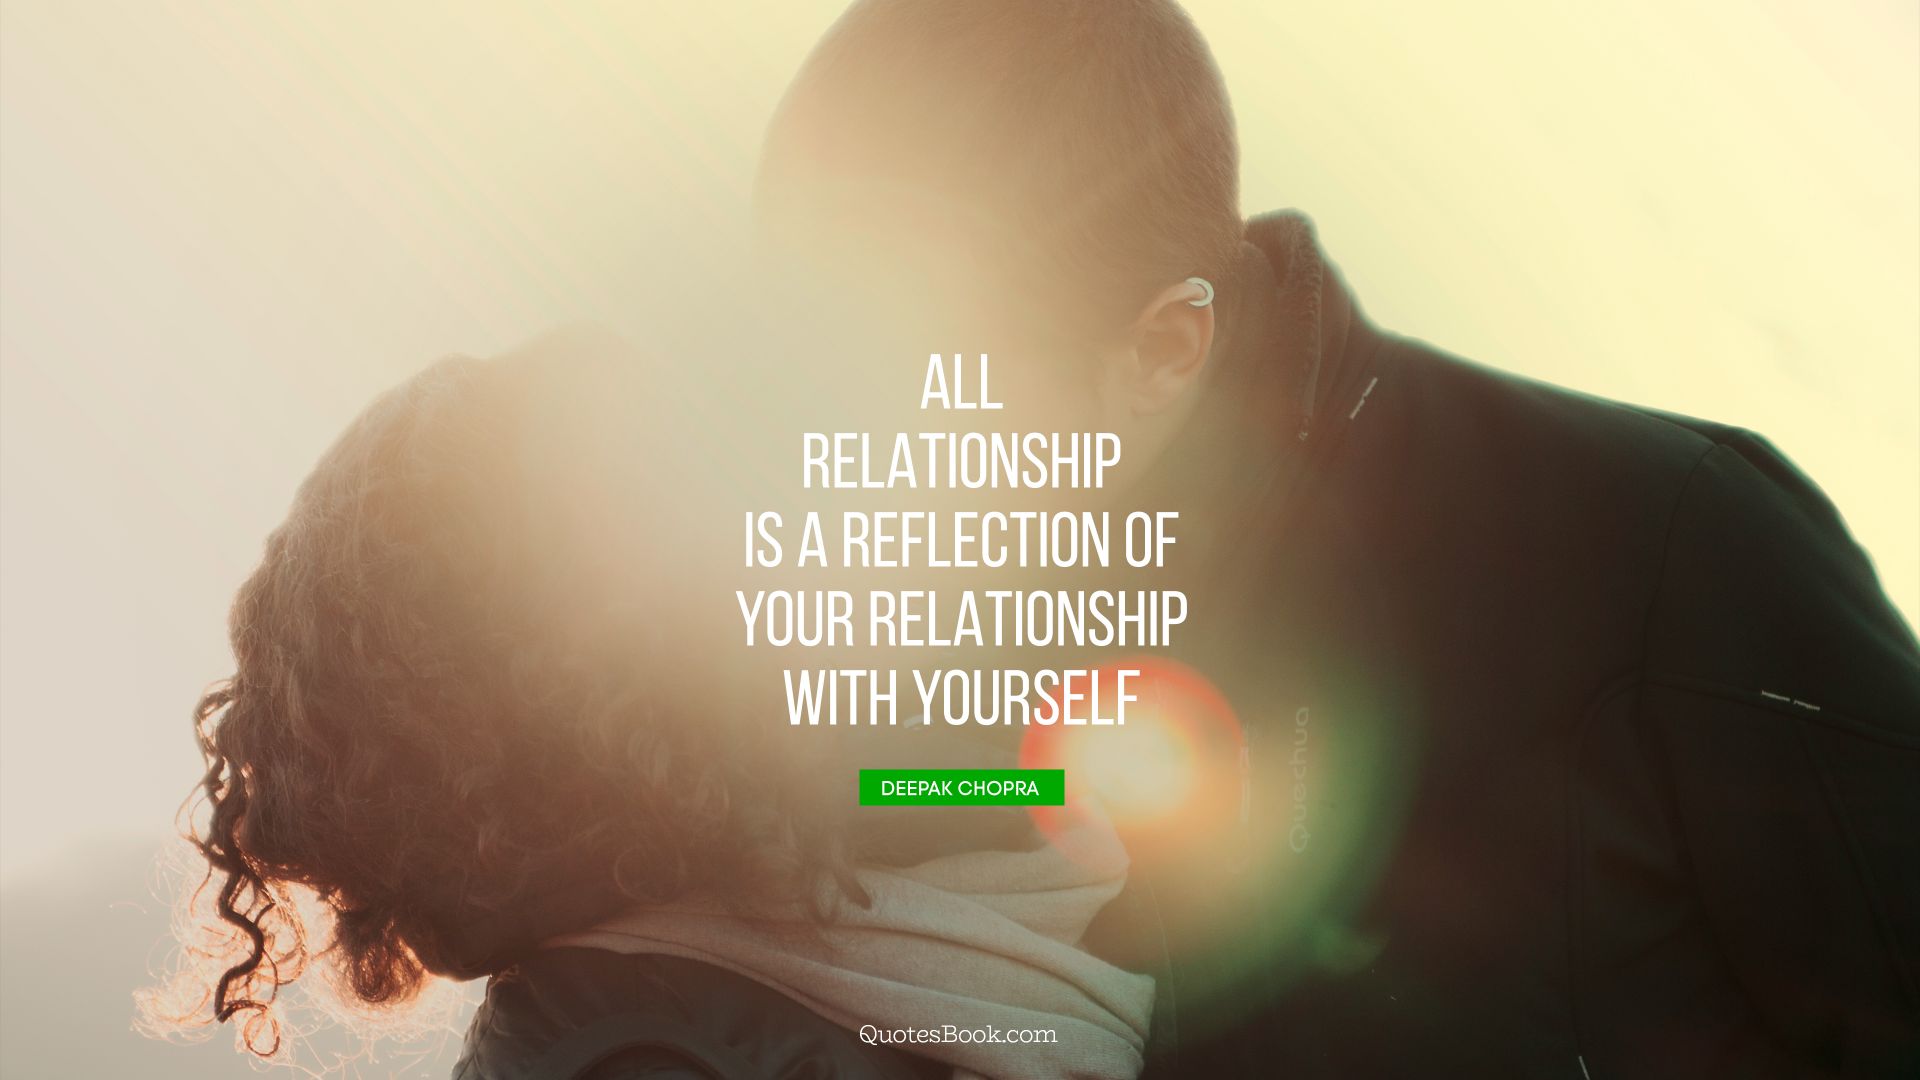 All relationship is a reflection of your relationship with yourself. - Quote by Deepak Chopra